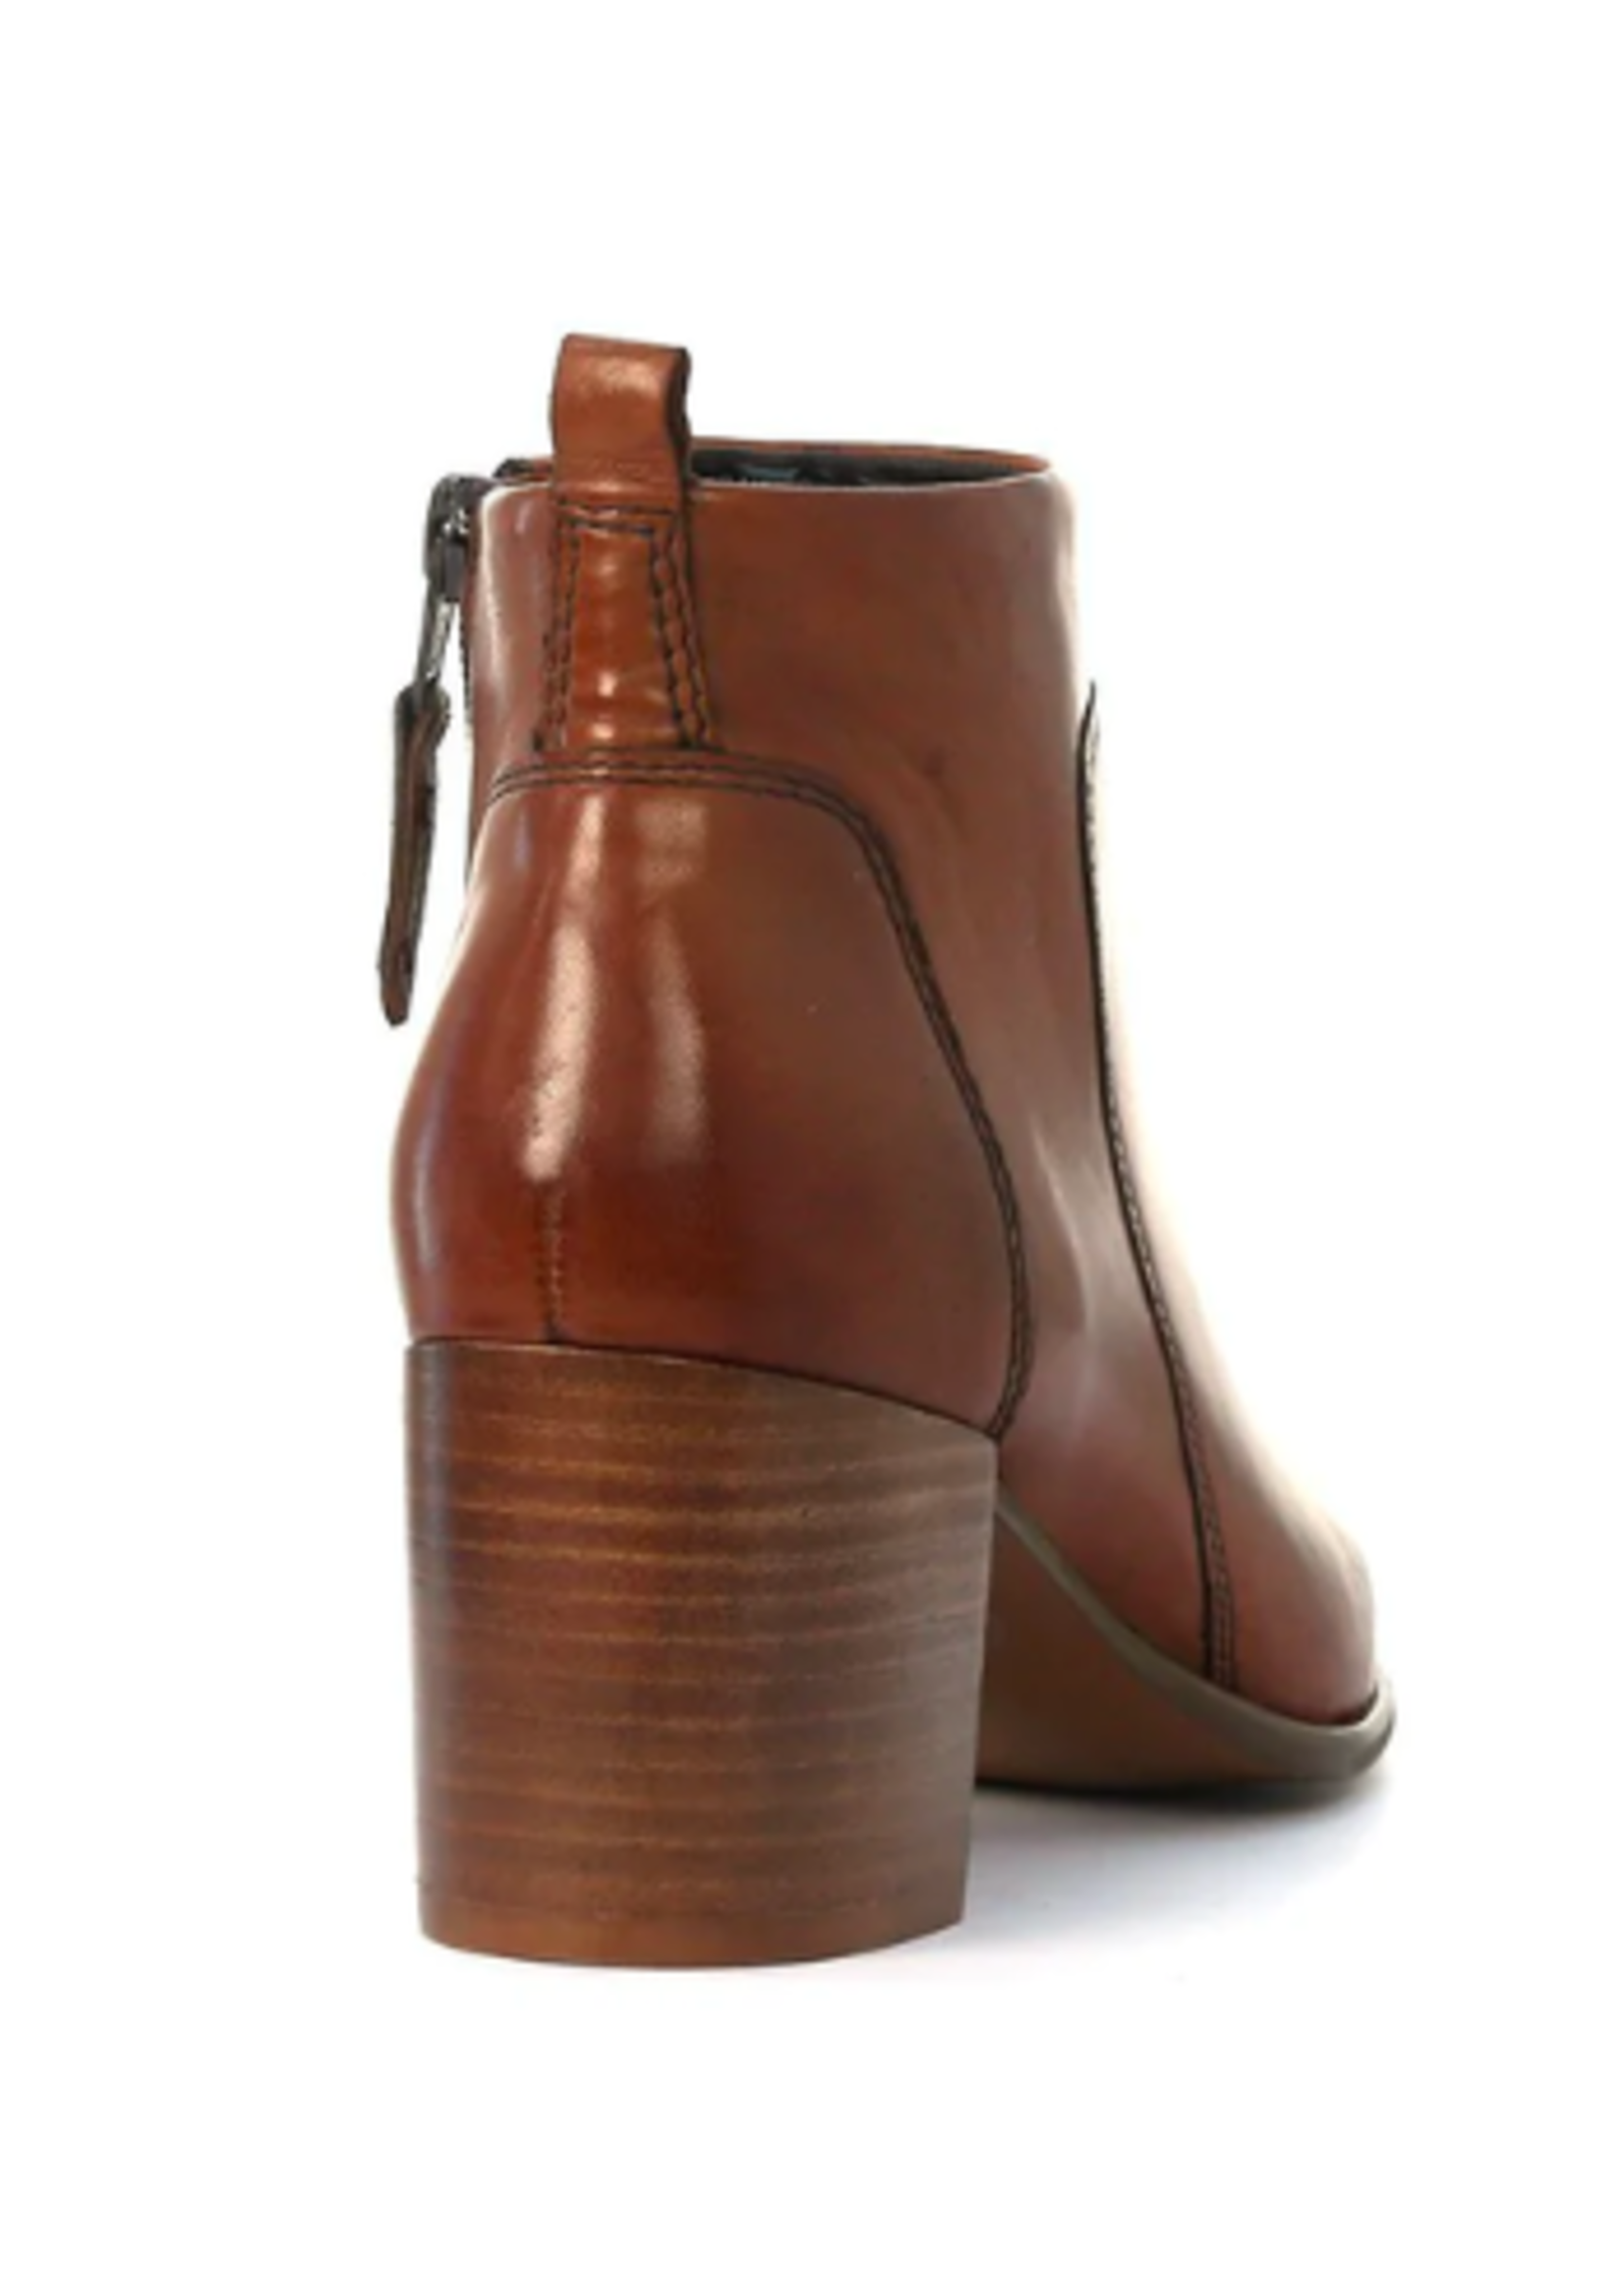 EOS Footwear Polim Leather Ankle Boots - Brandy